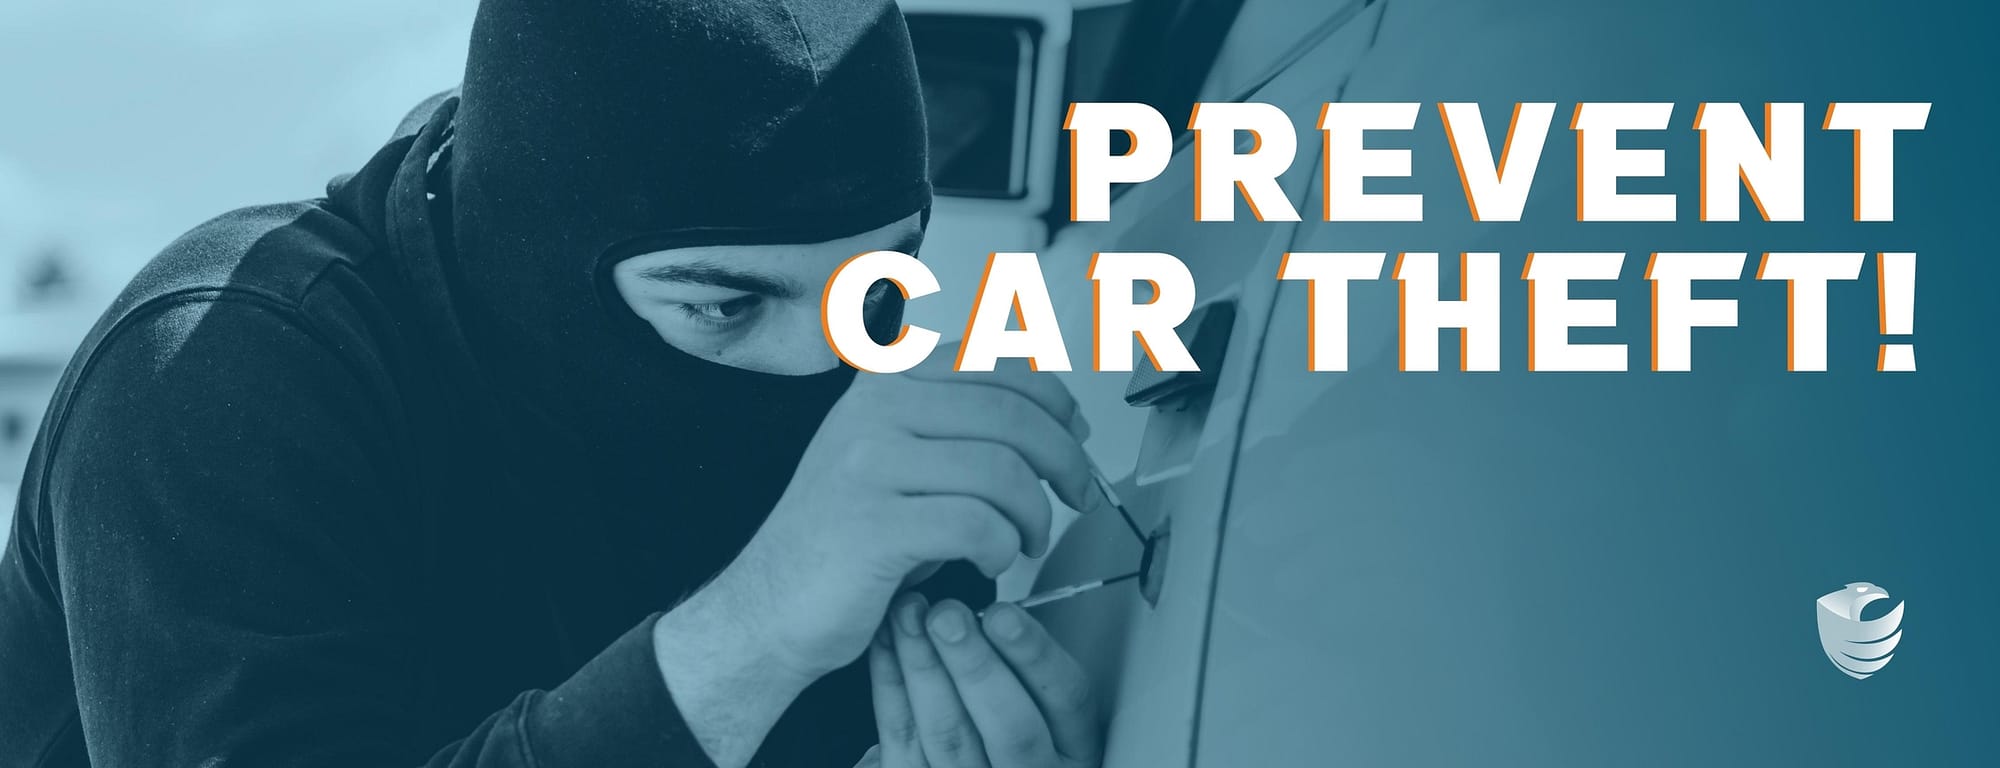 This is the header image for the BPS Security article titled, “Five tips to help prevent car theft”